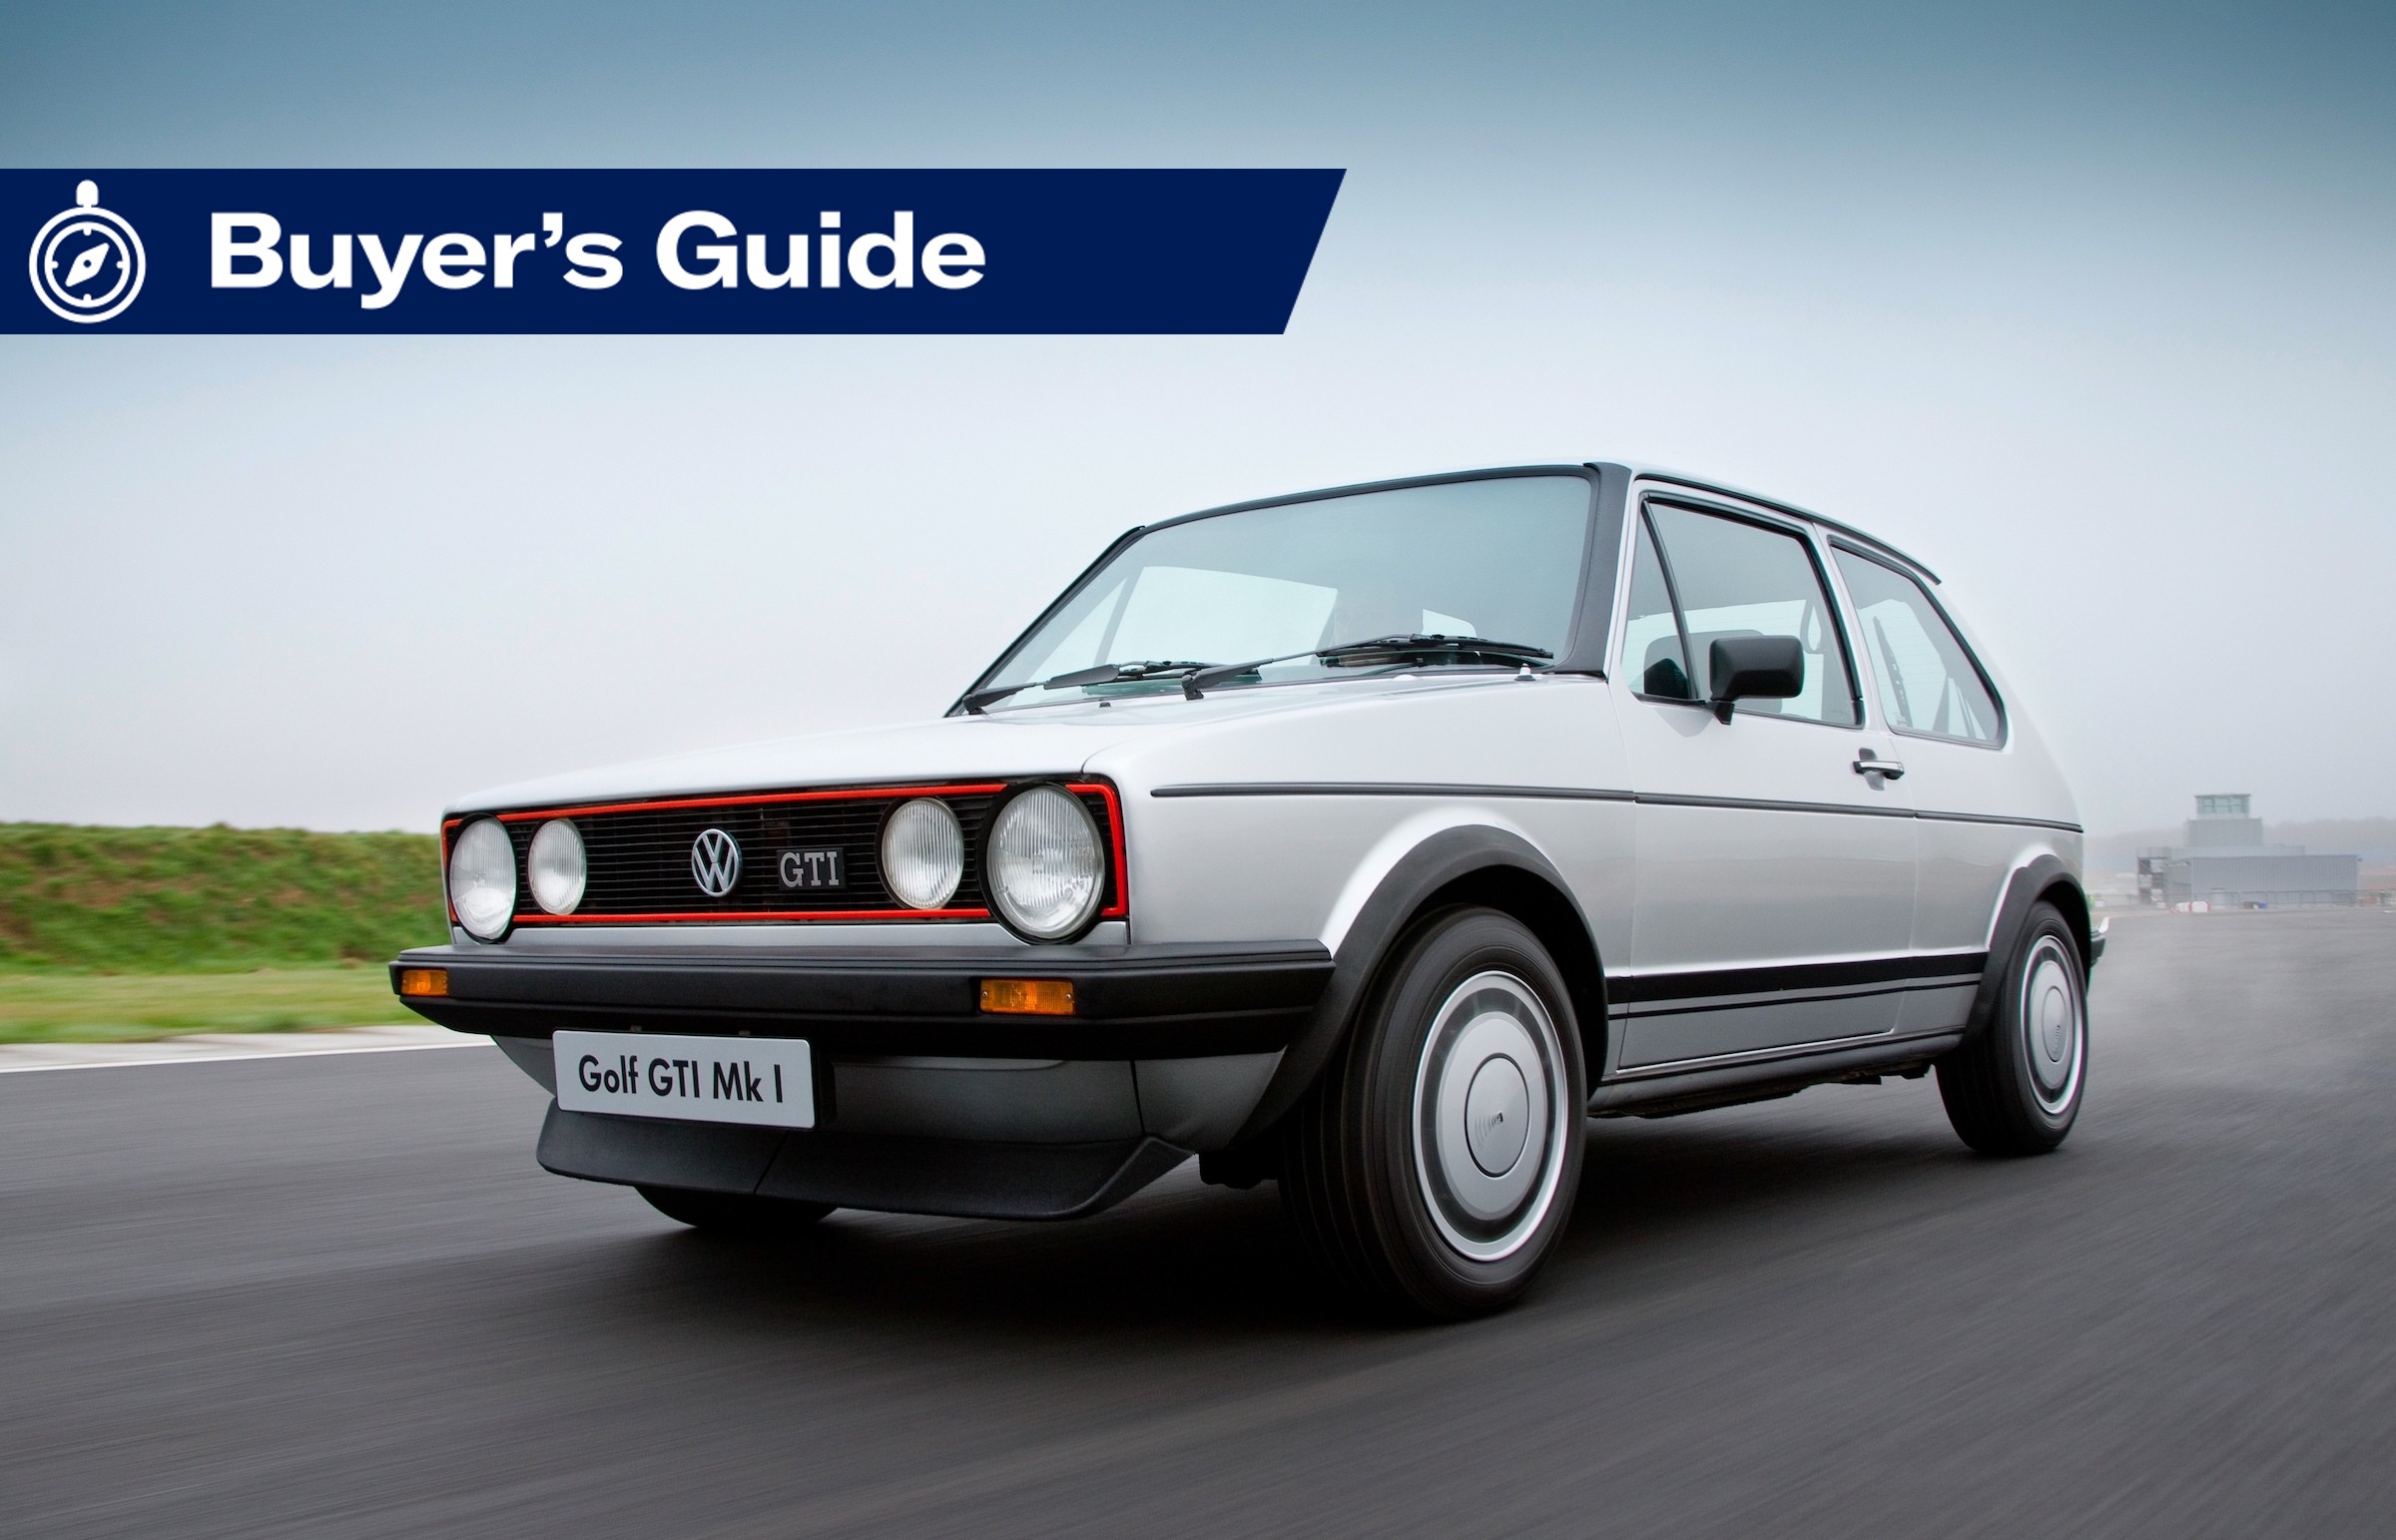 Volkswagen Golf GTI: A look back at the powered-up limited